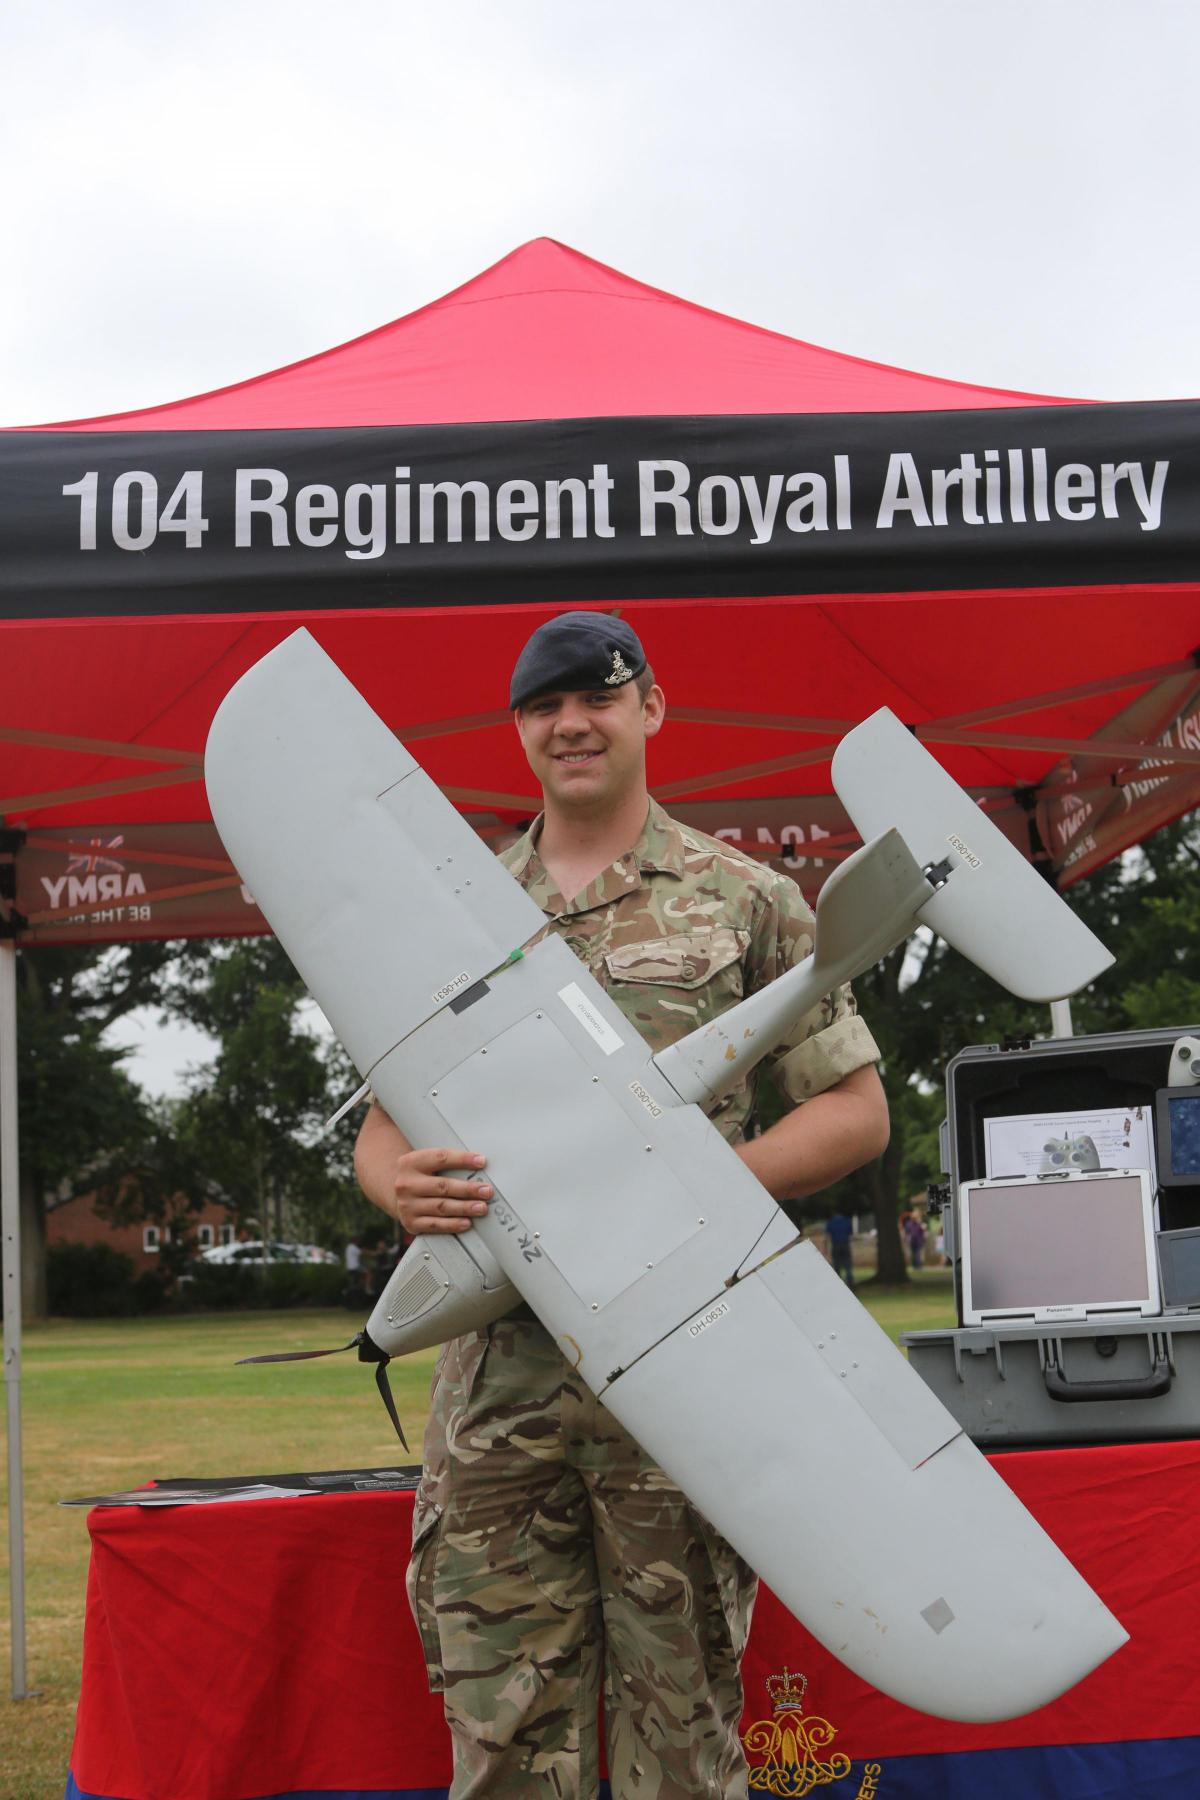 Gunner Guy Roberts with a ‘Desert Hawk’ MUAS at the Meet the Army Day in Vivary Park 2016